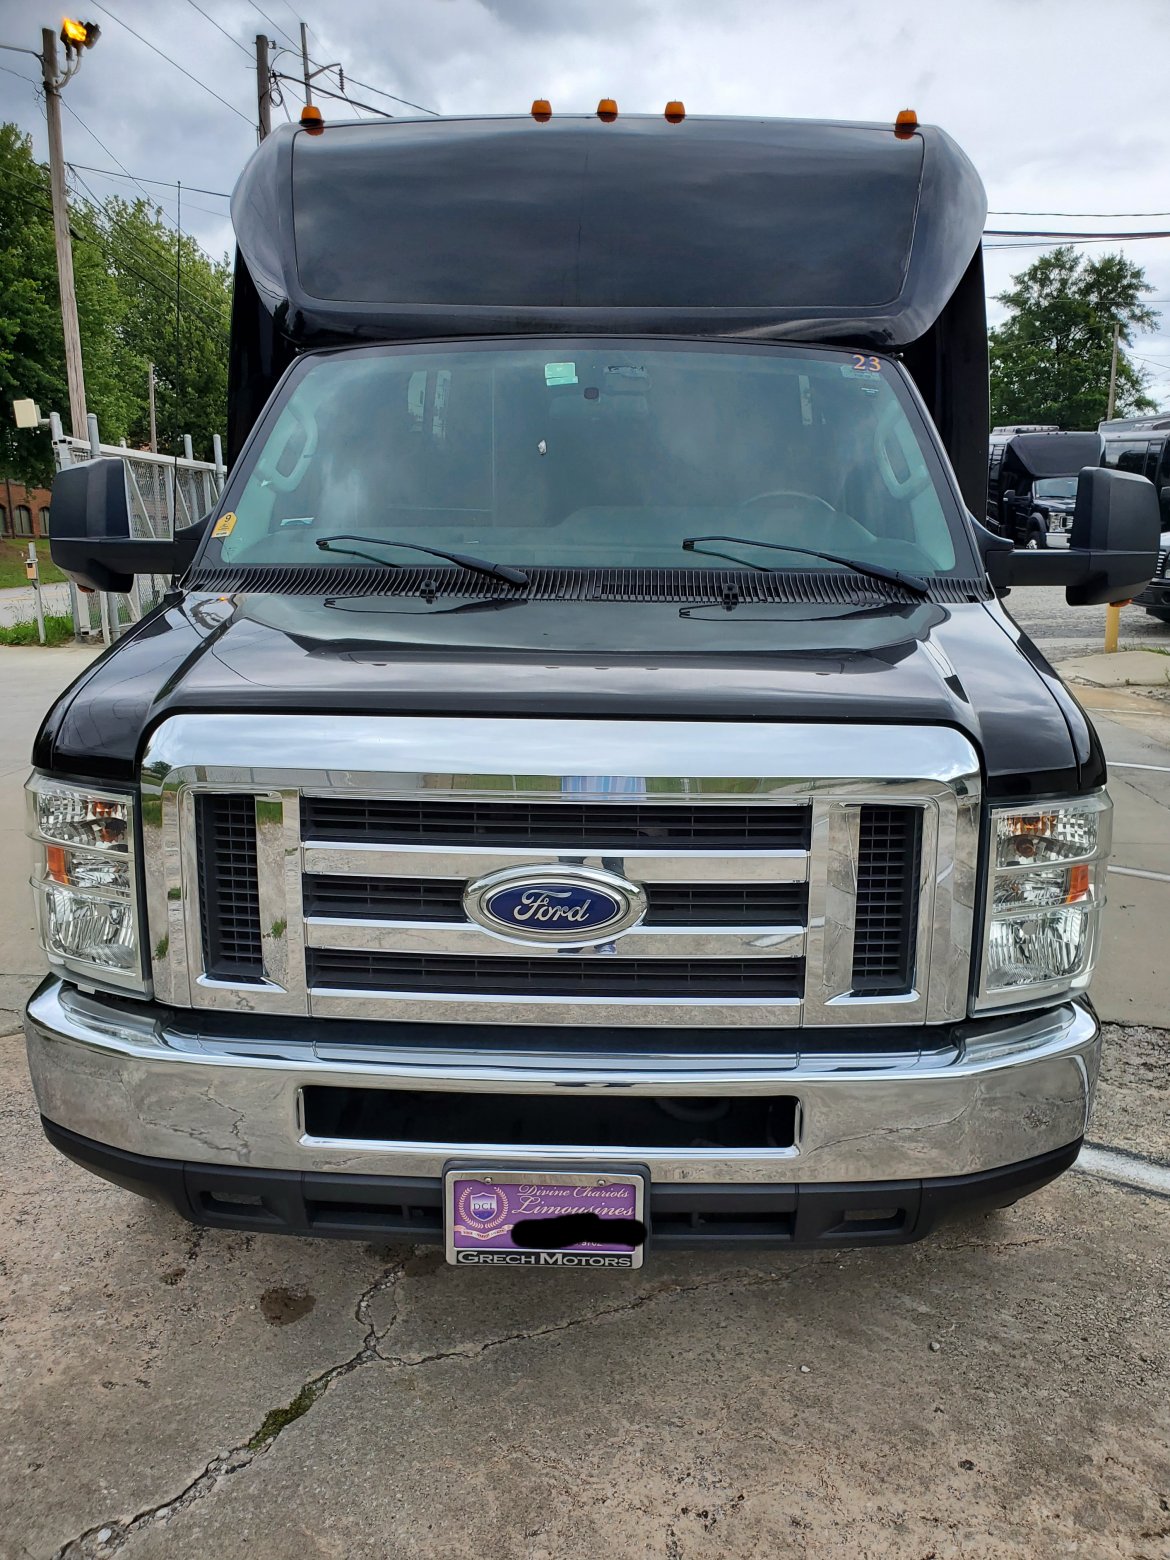 Executive Shuttle for sale: 2016 Ford E - 450 by Grech - GM 28